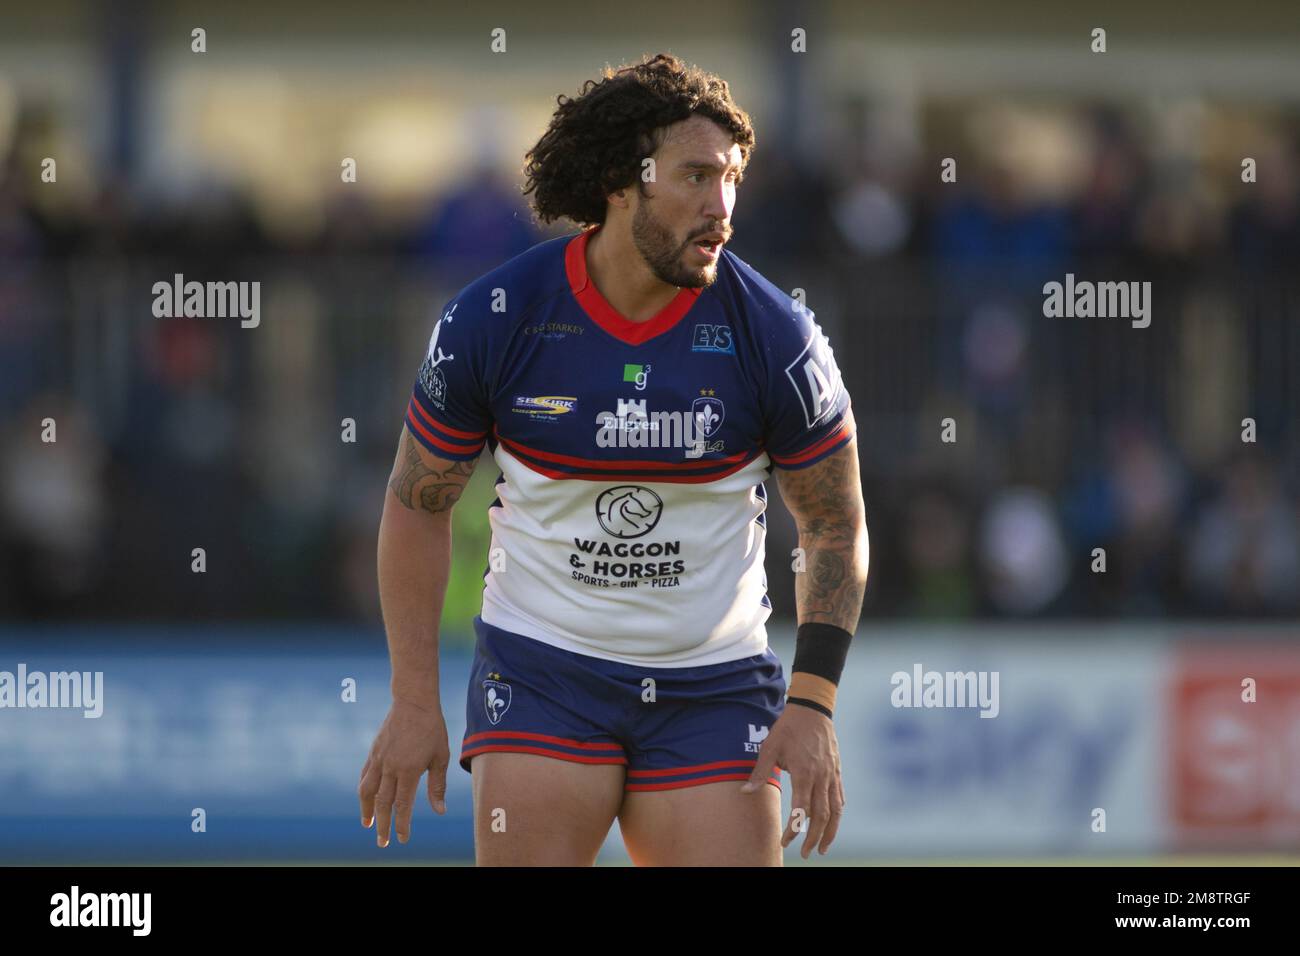 Wakefield, UK. 15th Jan, 2023. The Be Well Support Stadium, Wakefield, West Yorkshire, 15th January 2023. Wakefield Trinity vs Halifax Panthers during the Reece LyneÕs Testimonial Pre-Season Friendly Match Kevin Proctor of Wakefield Trinity Credit: Touchlinepics/Alamy Live News Stock Photo